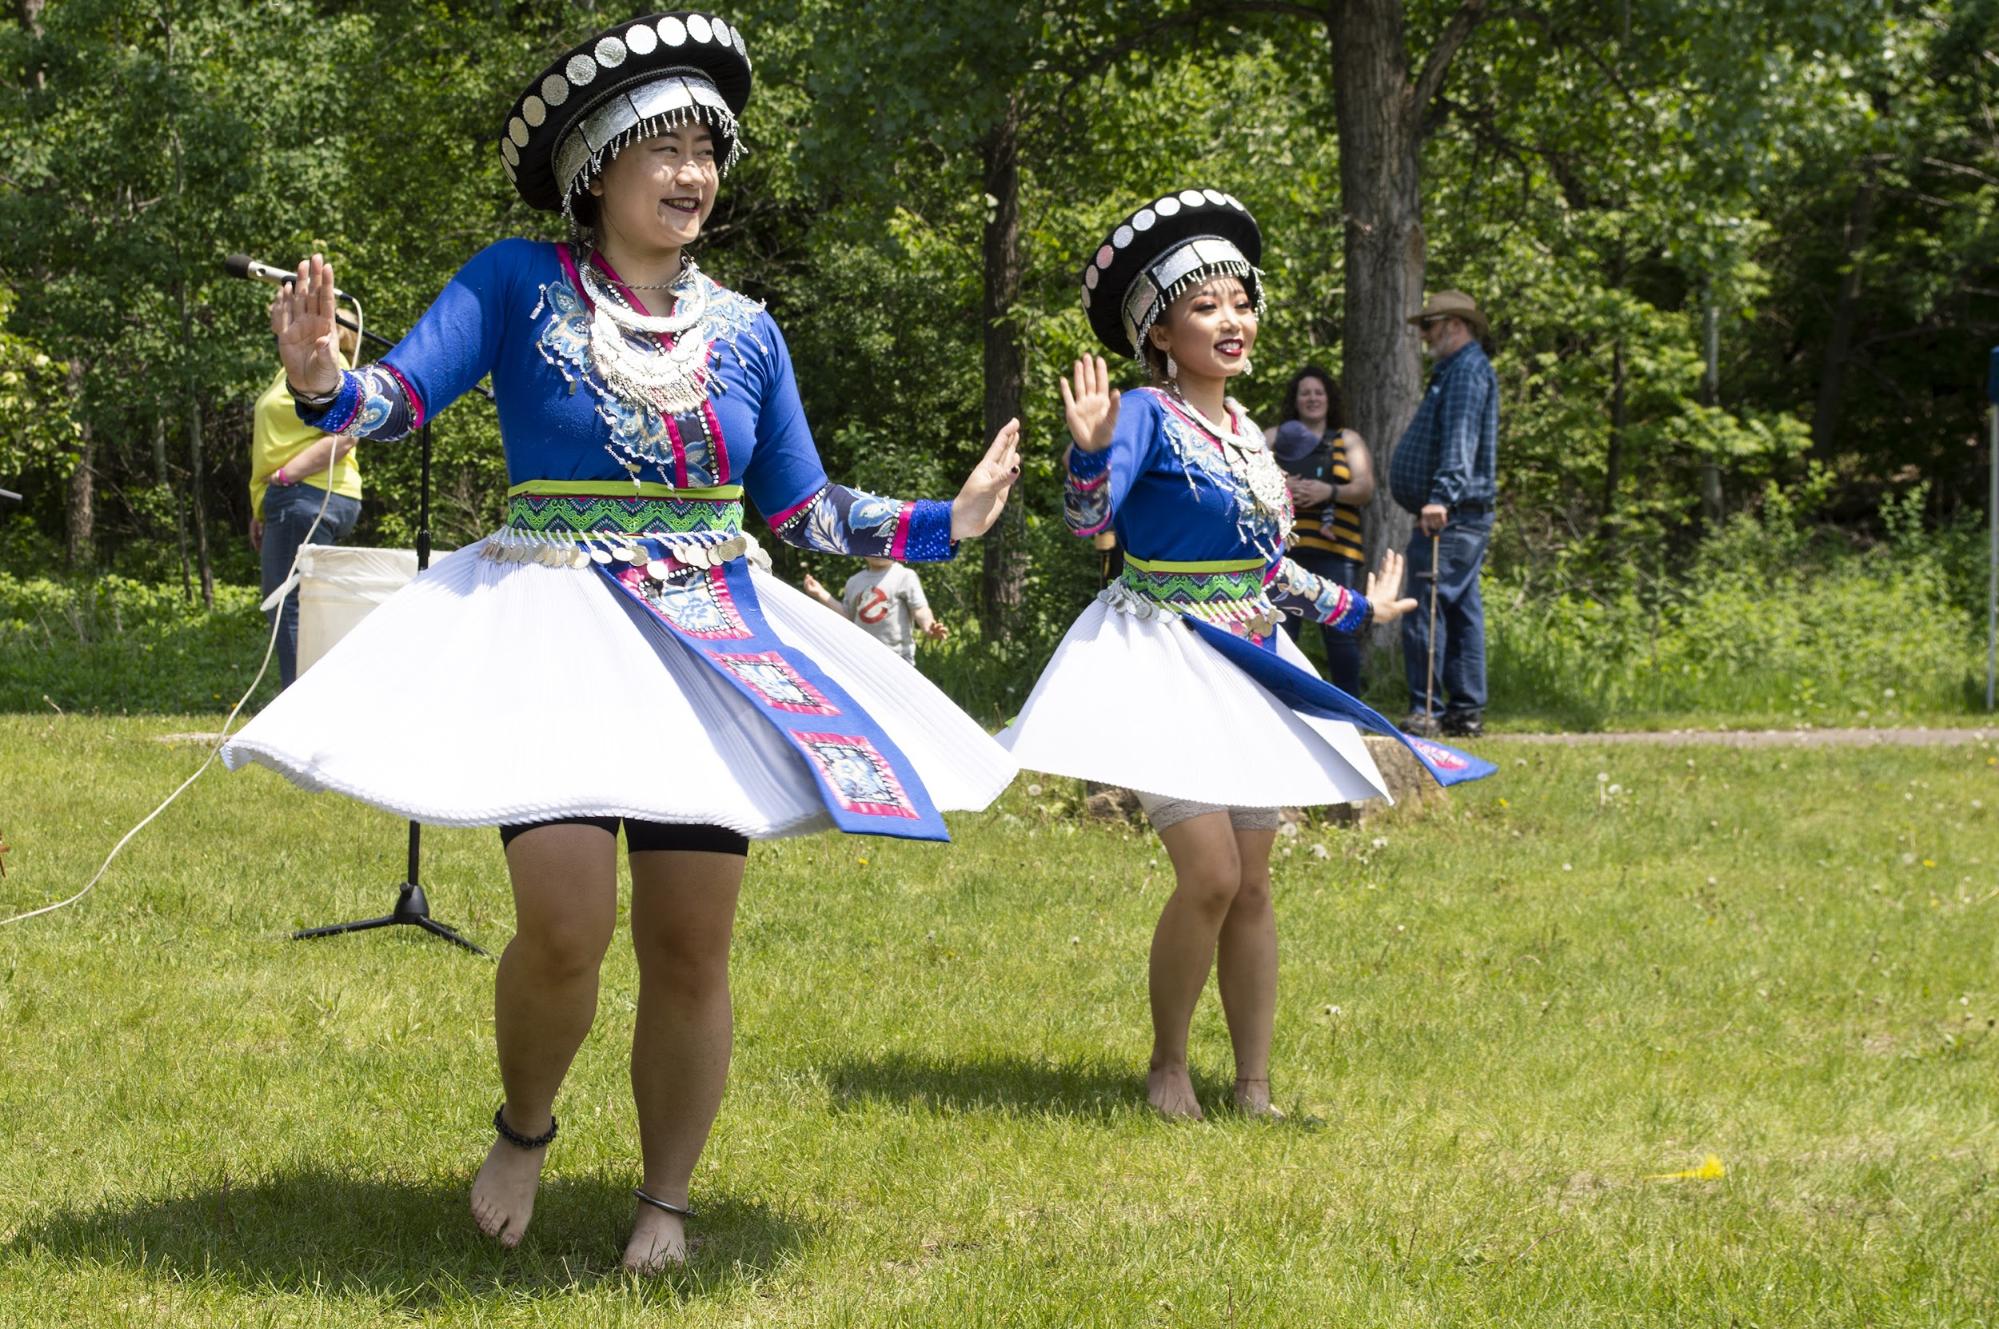 You Lee, left, and Nkauj Sheng dance in traditional Hmong style. They are co-founders of St. Paul’s YeS Dance Academy. (Mandy Hathaway / The Metropolitan)